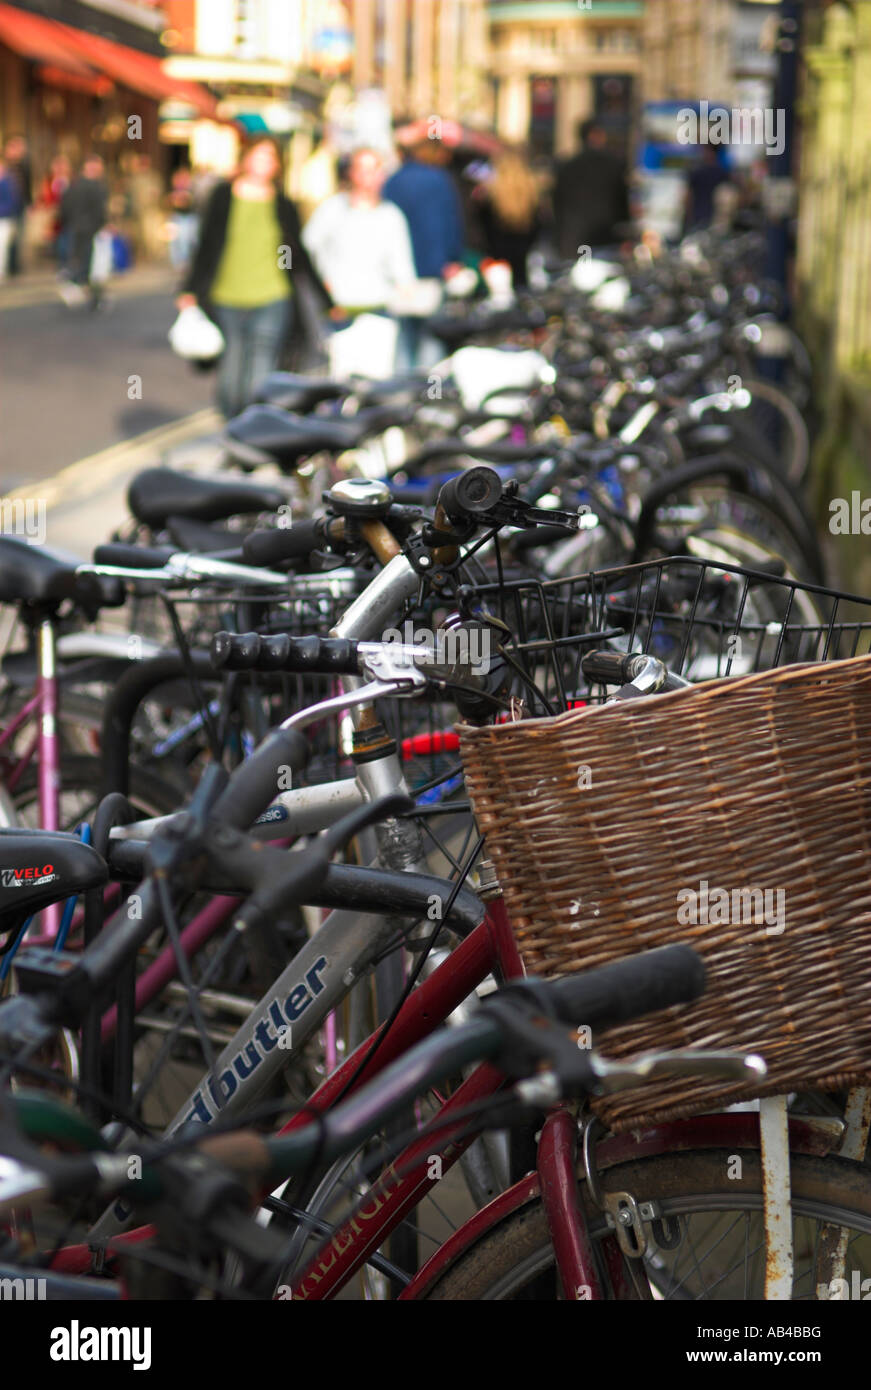 Row of bicycles parked on pavement along street Stock Photo